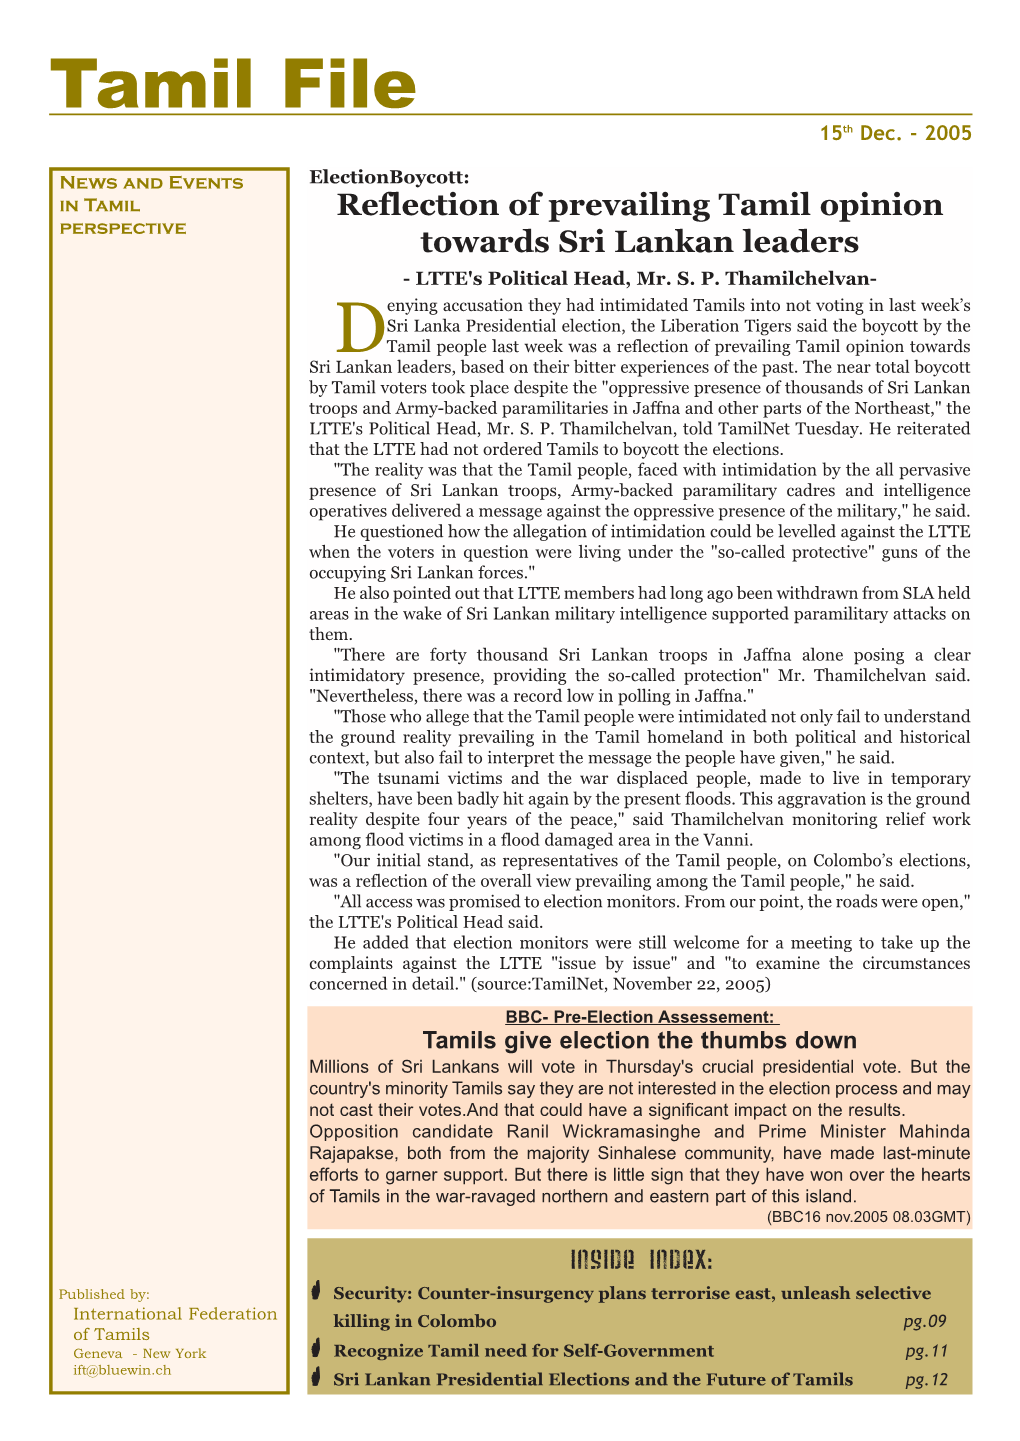 Ift@Bluewin.Ch + Sri Lankan Presidential Elections and the Future of Tamils Pg.12 - Dateline: 15Th Dec